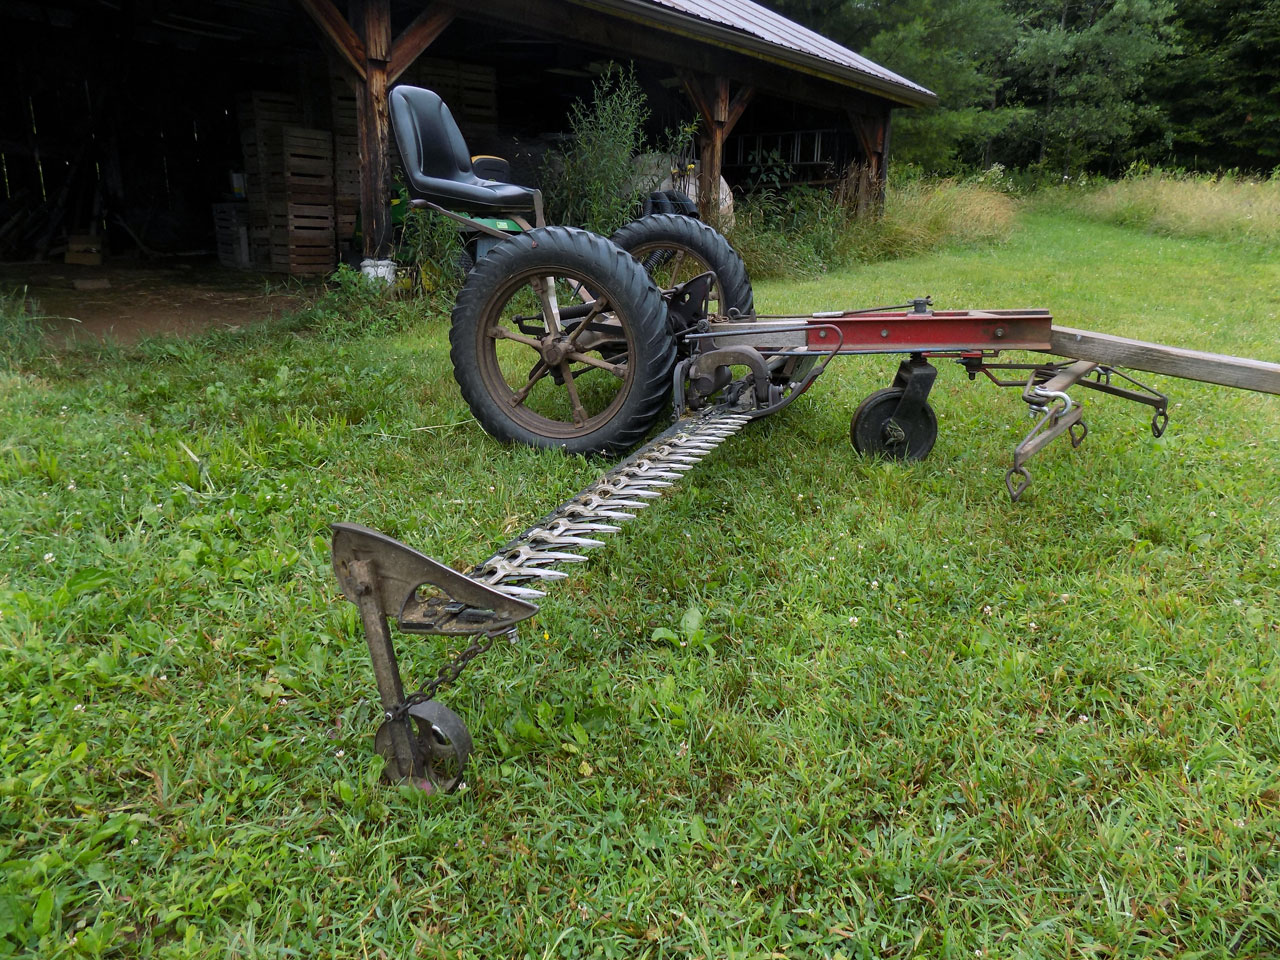 Mower Modifications for Cover Crop Cocktails